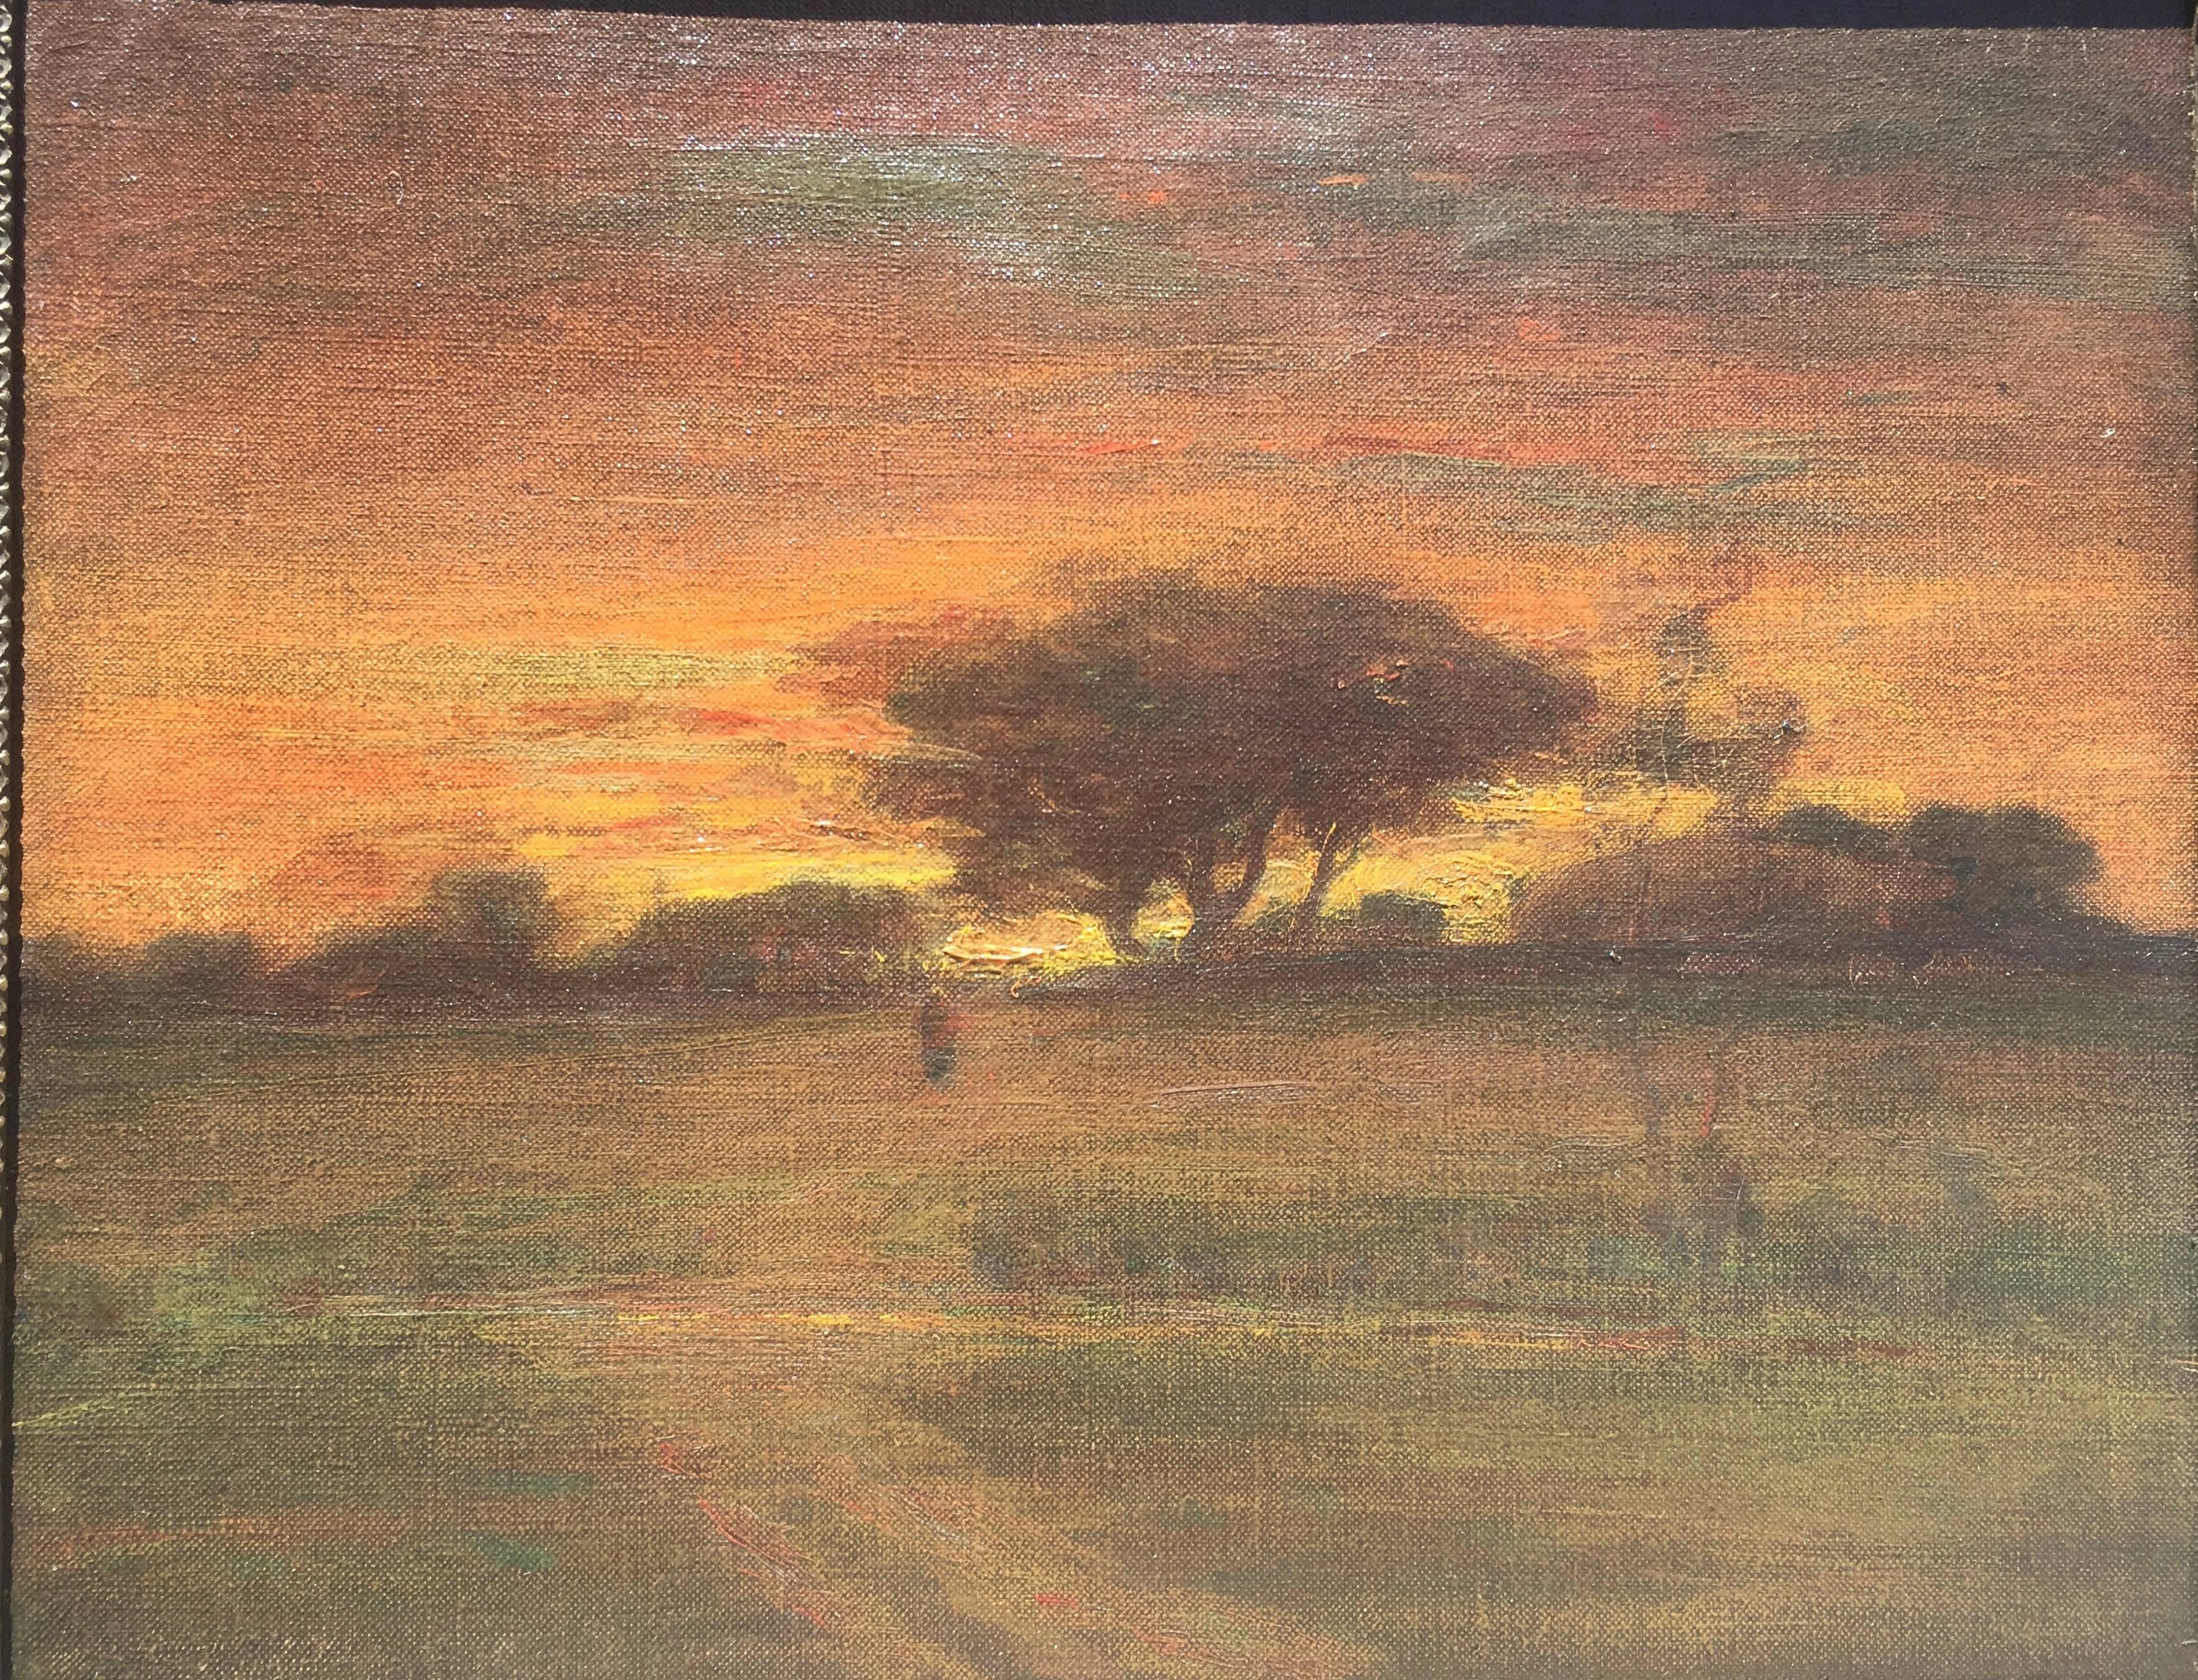 Sunset with Figure Walking into Village with Stream in the foreground - Painting by In the style of George Inness